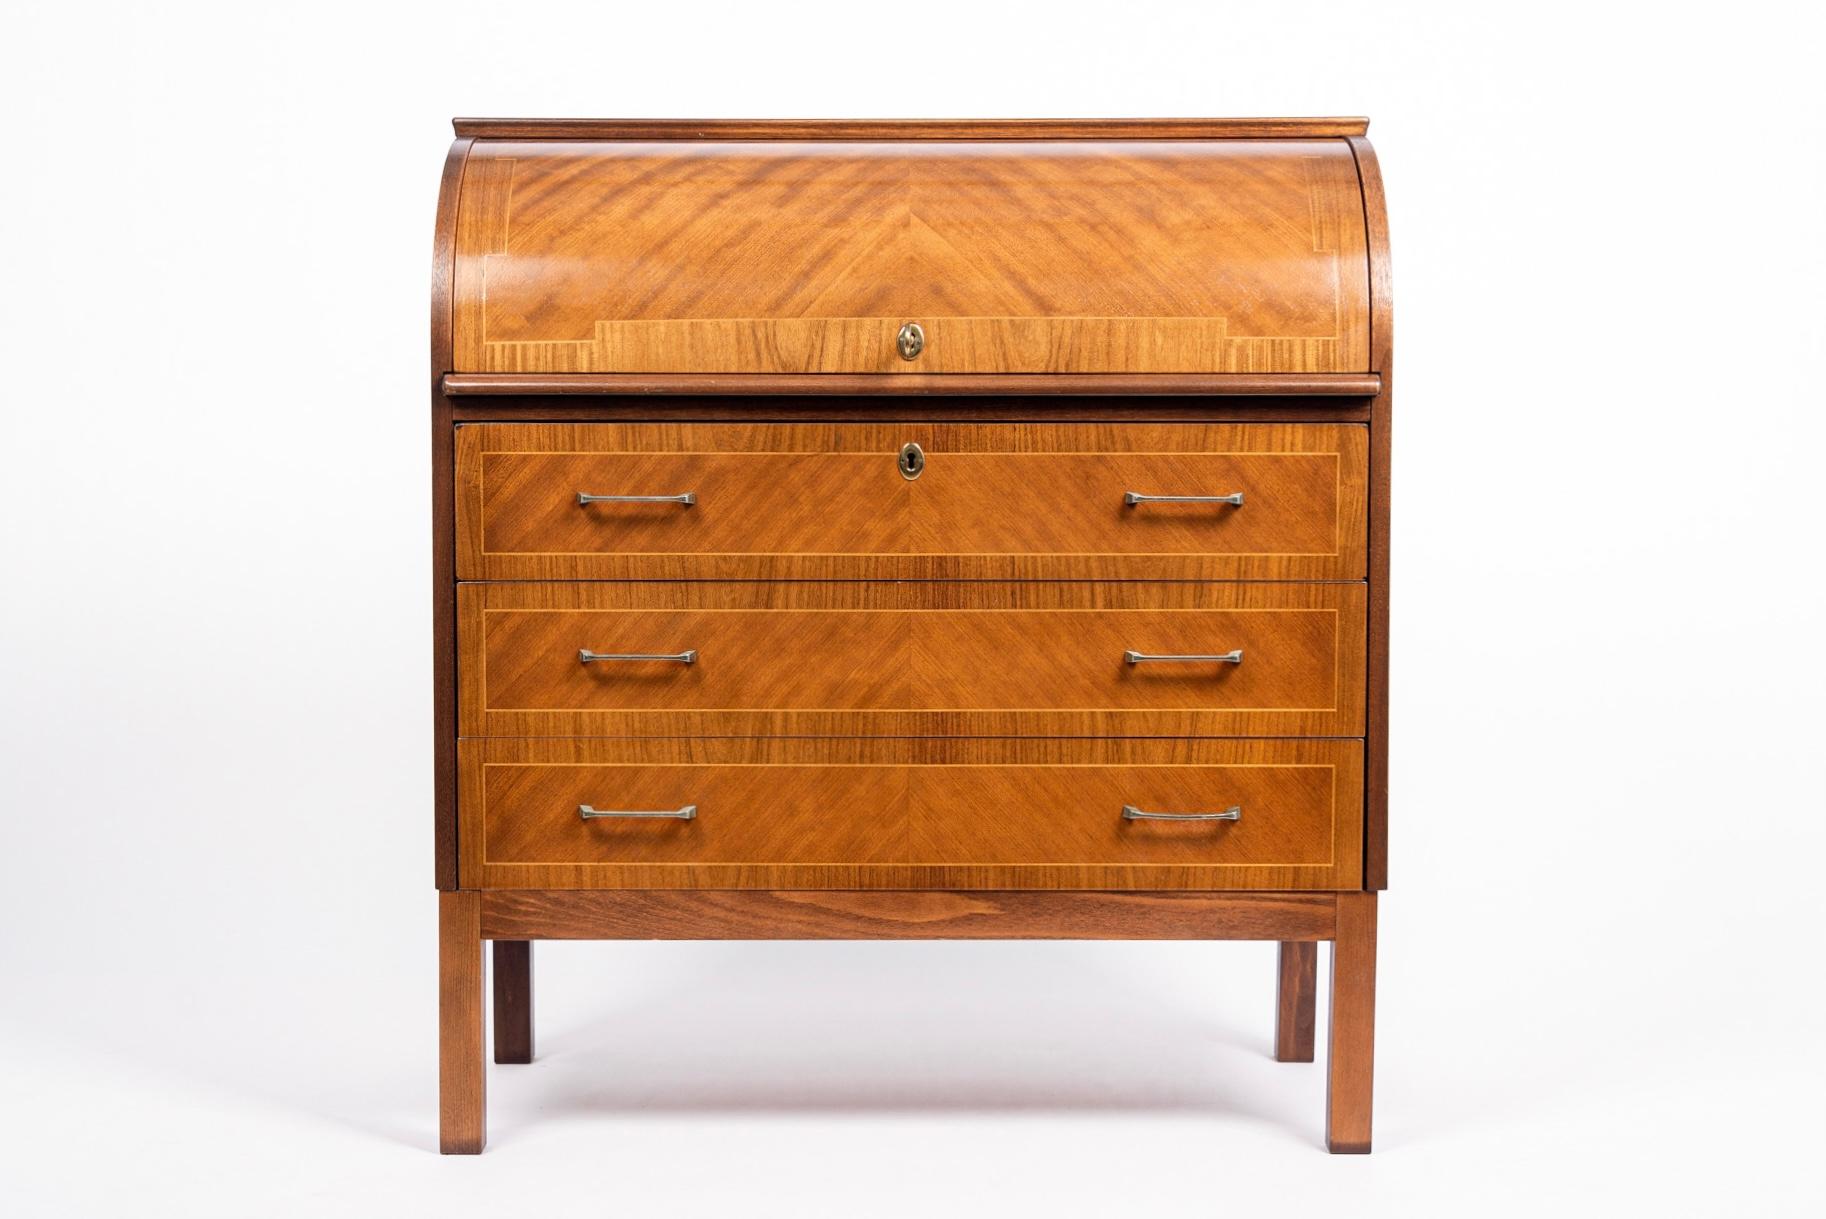 This vintage mid century Swedish modern two-toned cylinder secretary desk cabinet circa 1960 has a classic Scandinavian modern design with clean minimalist lines and features a stunning inlaid veneer design. The rolltop opens on a top compartment